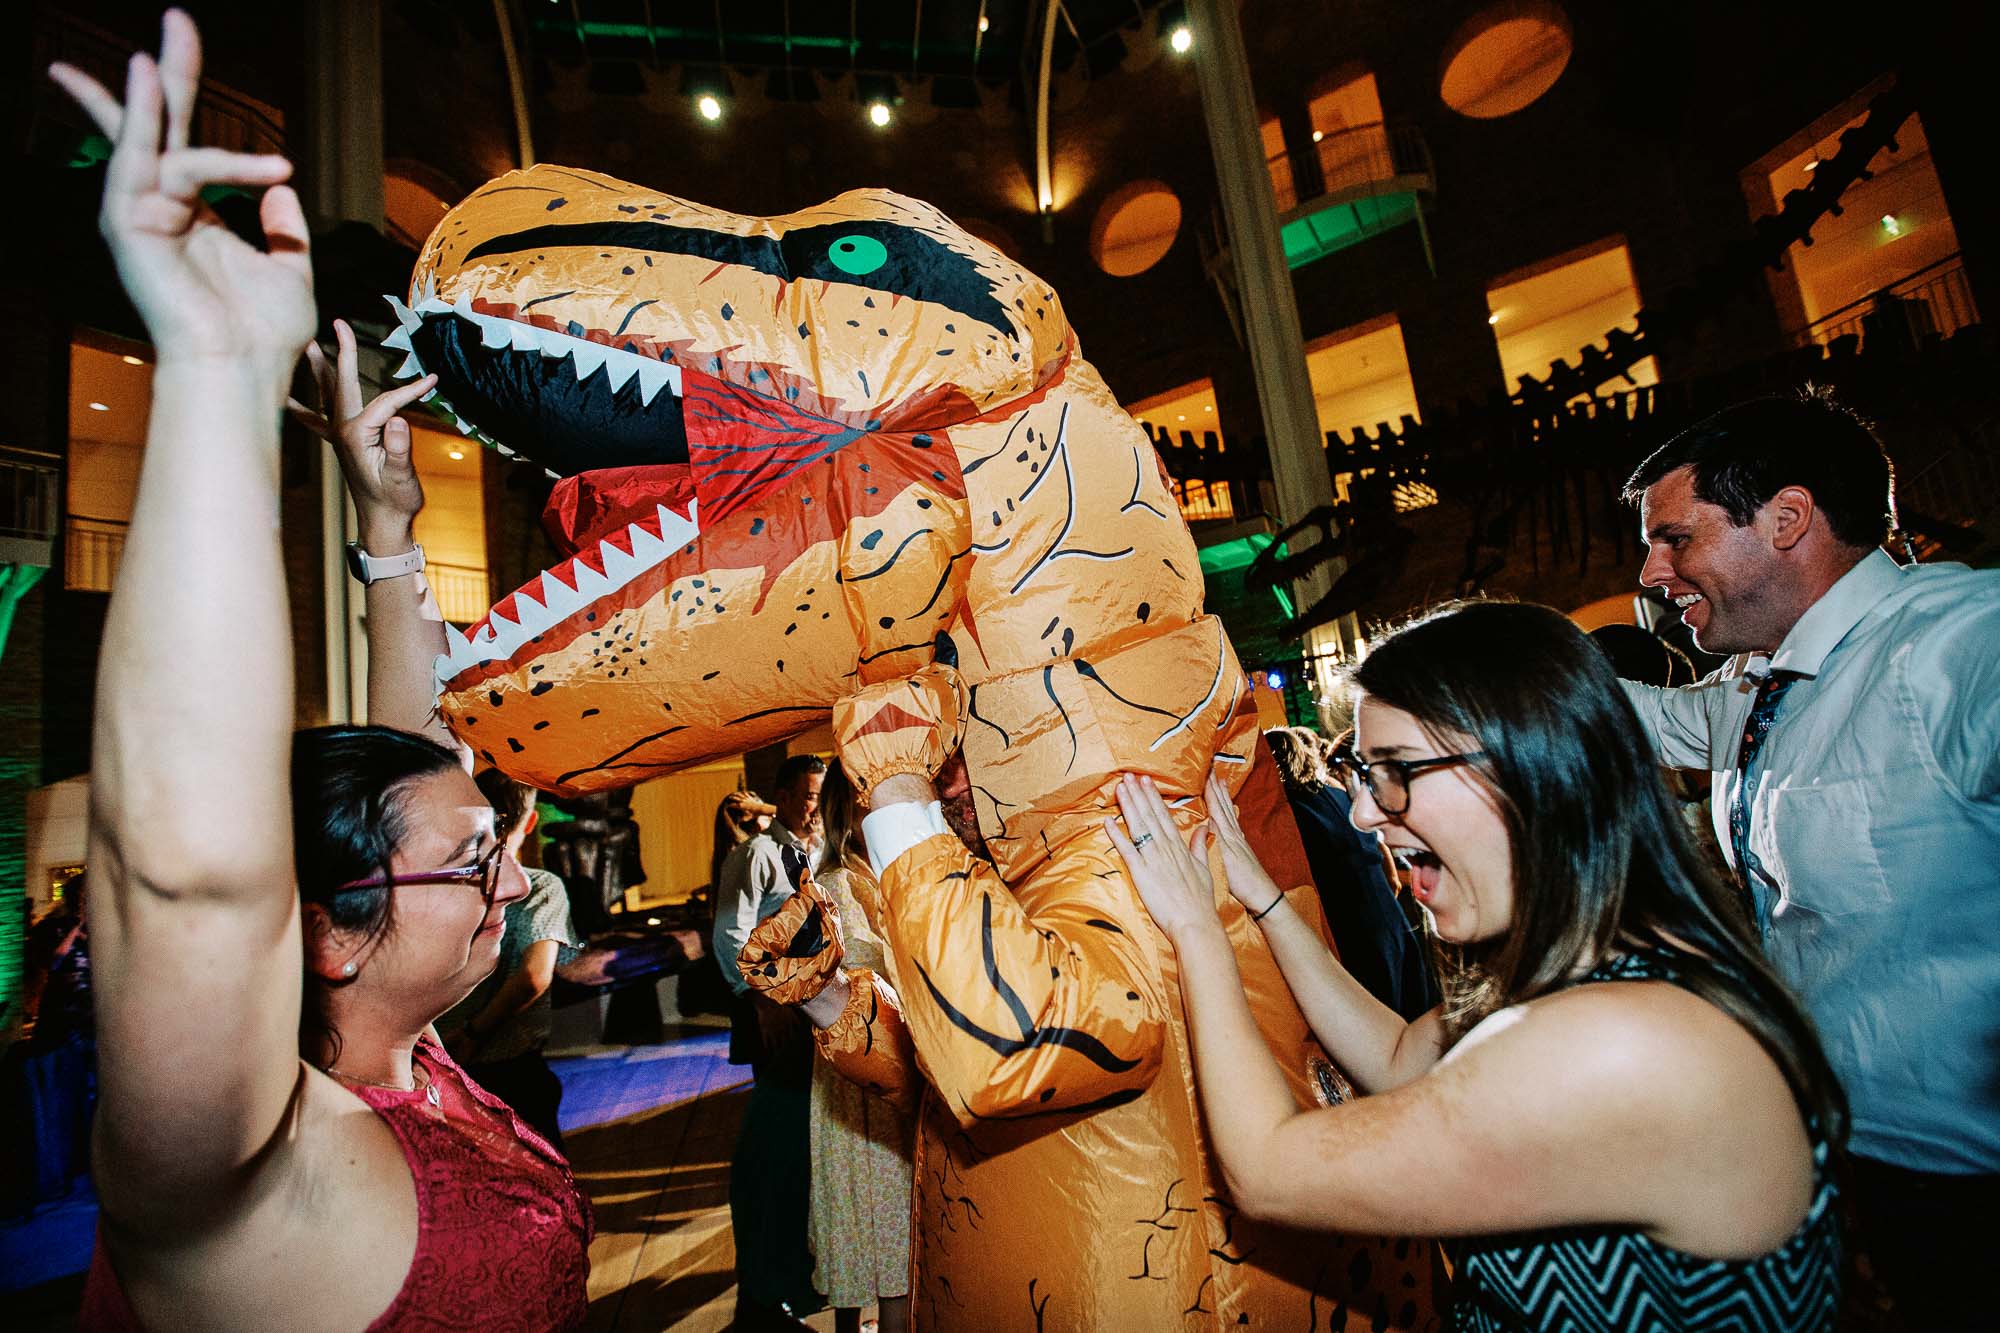 A person in a dinosaur costume and two women dance at a wedding